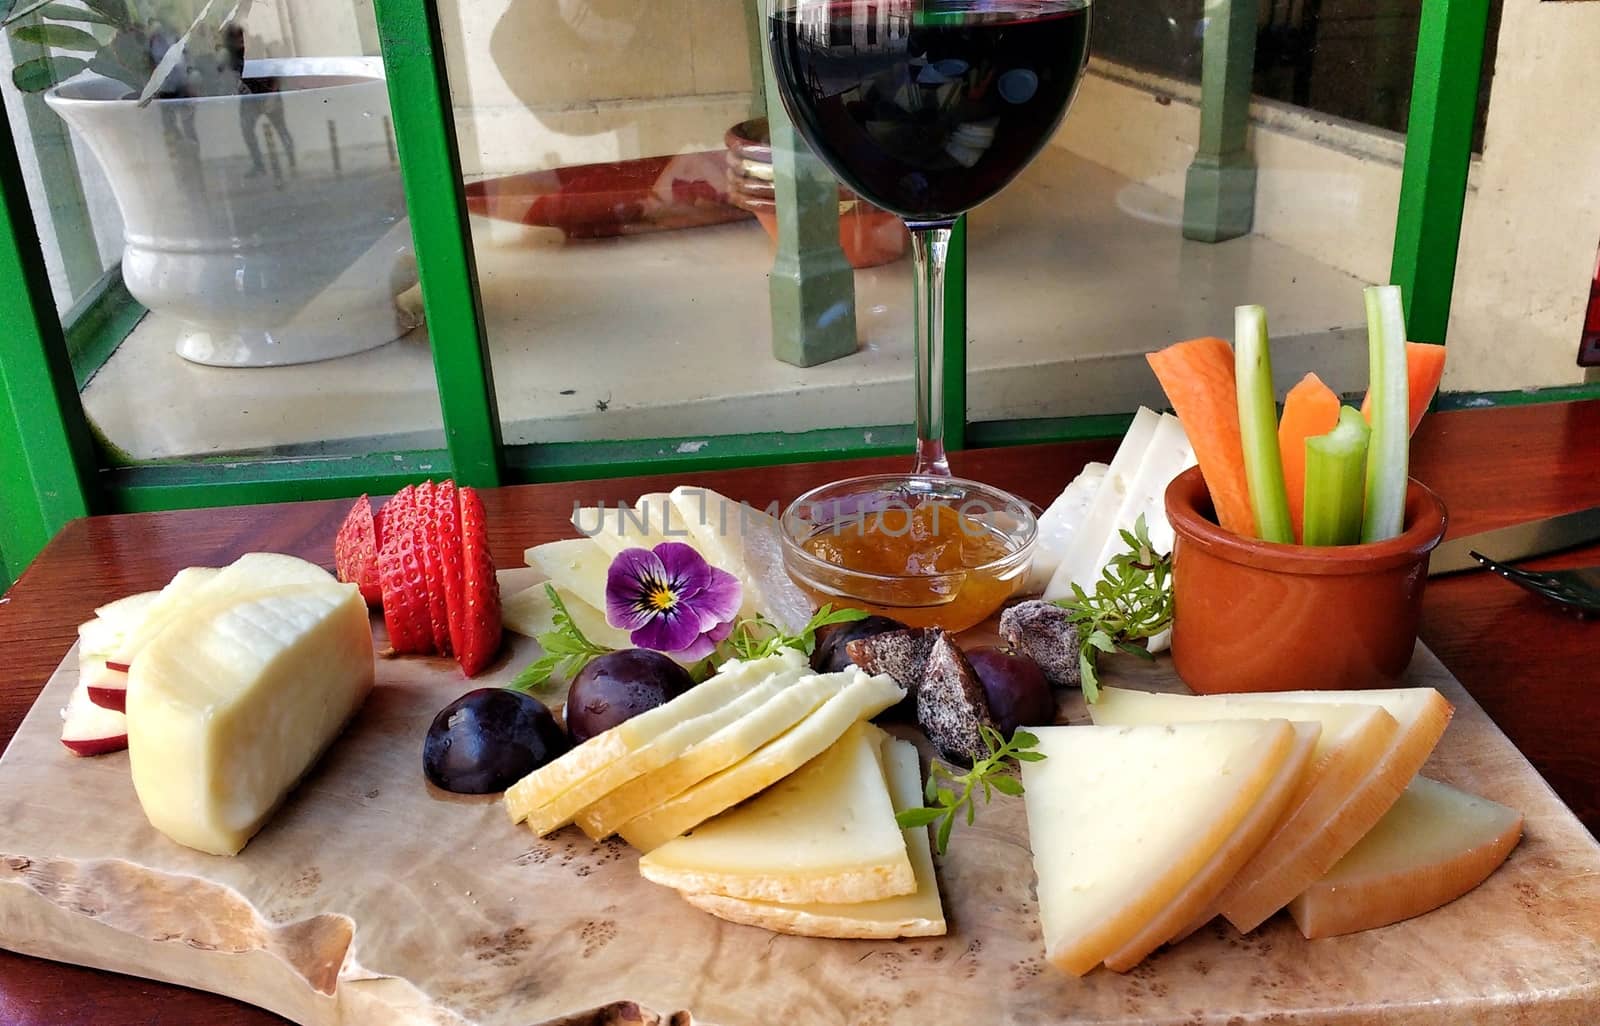 Varied cheese board with vegetables and a glass of red wine in a bar